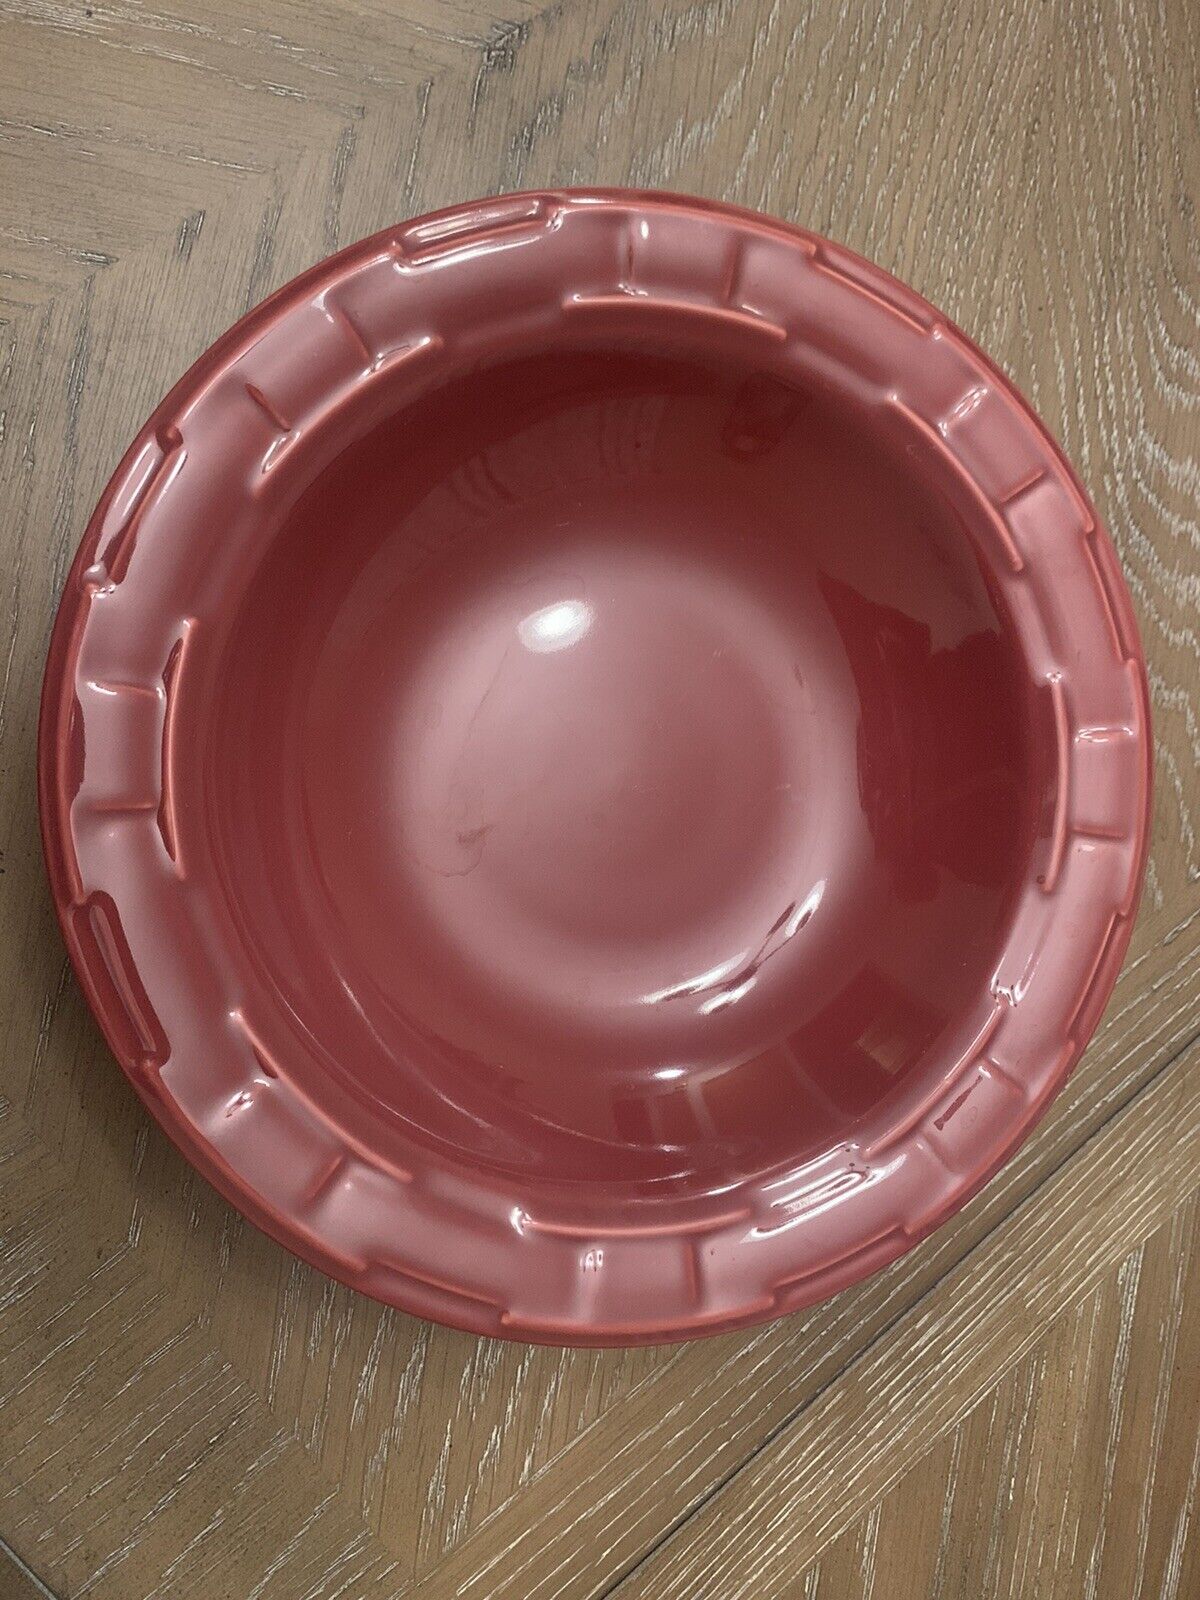 Longaberger Pottery Woven Traditions 9”Pasta Serving Bowl Paprika Red Maroon